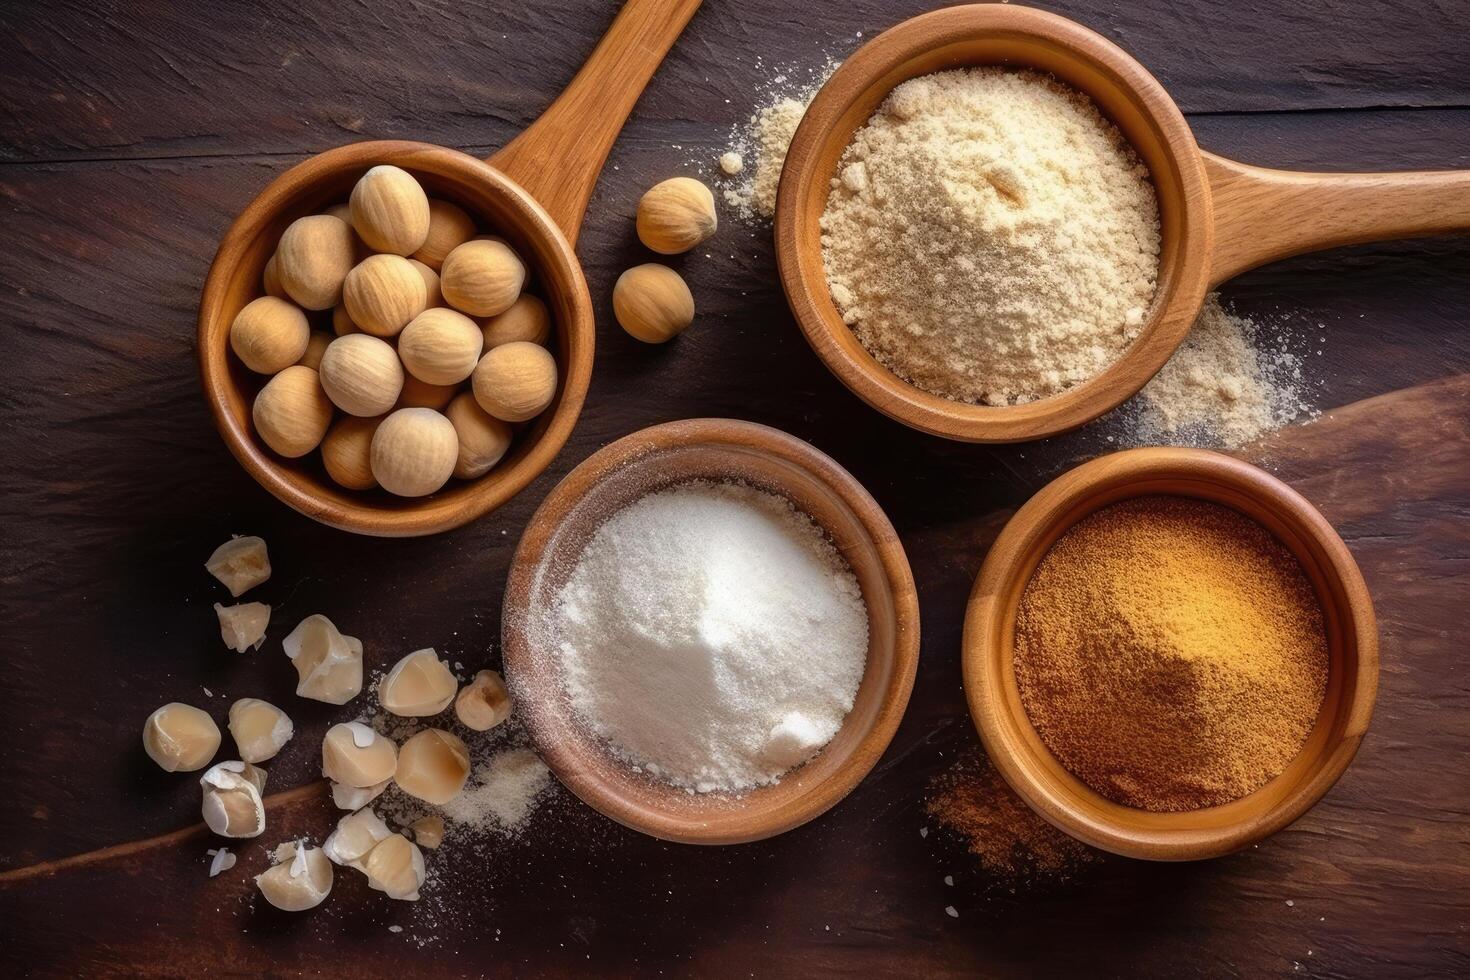 stock photo of candlenut powder on the kitchen flat lay photography